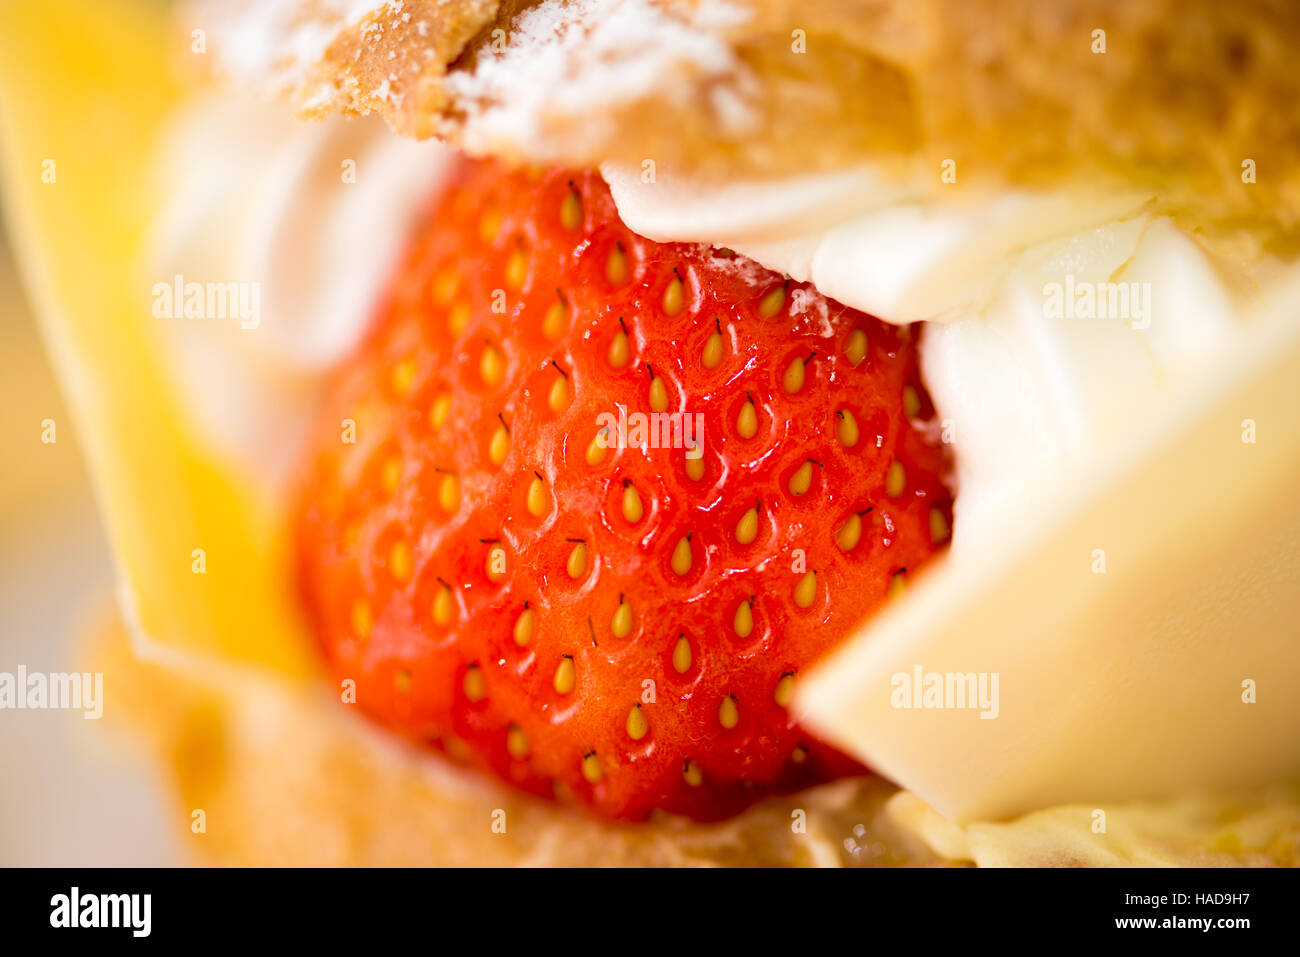 Fresh strawberry with cream of a strawberry puff, close up Stock Photo